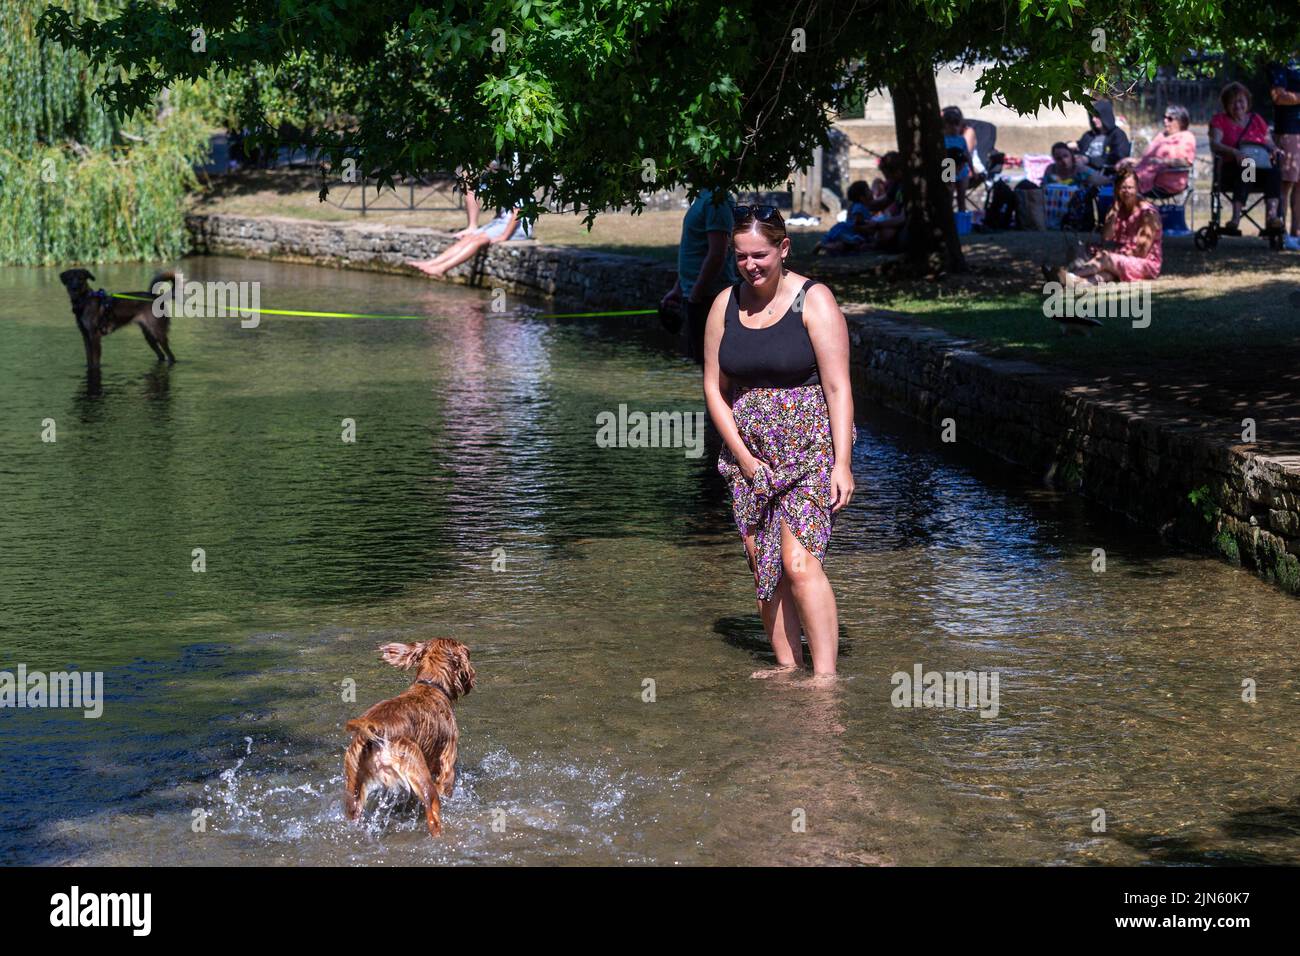 Bourton on the Water, Glocs, UK. 9th Aug, 2022. People are out and about enjoying the sun by the River Windrush in Bourton on the Water, Glocestershire, as temperatures are set to rise this coming week. Credit: Peter Lopeman/Alamy Live News Stock Photo